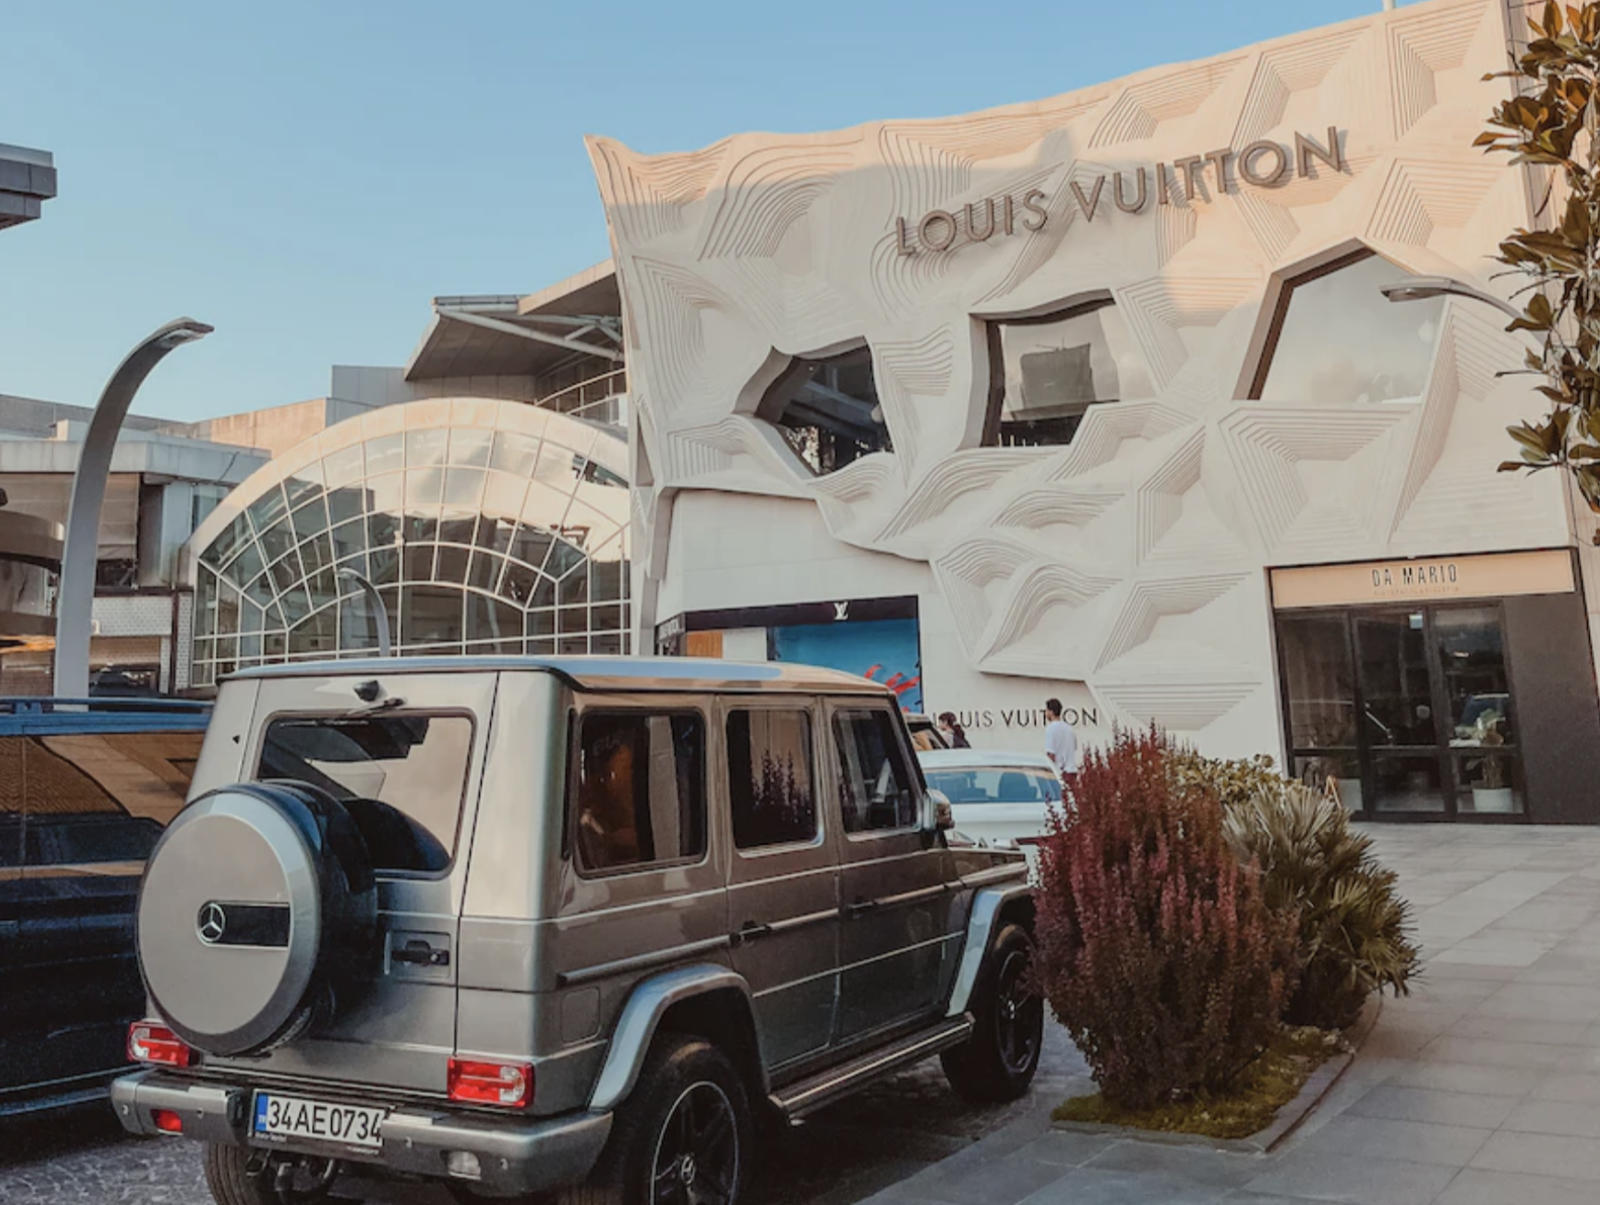 Court Throws Out Louis Vuitton's Copyright Claim Against Artist